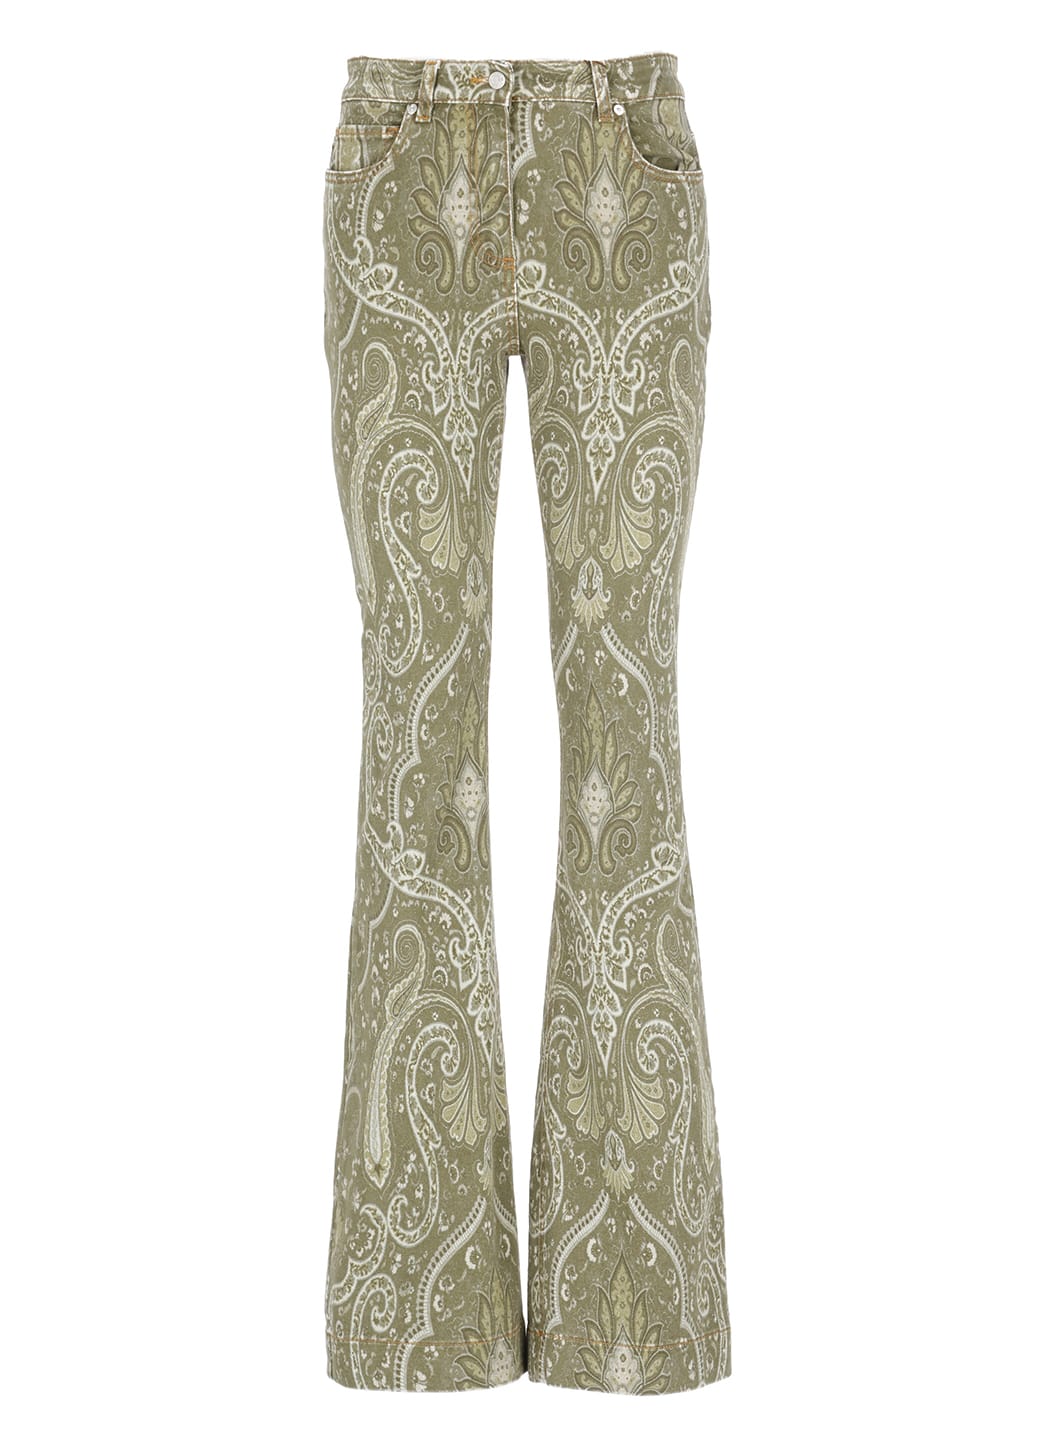 Etro Flared Green Printed Cotton Jeans